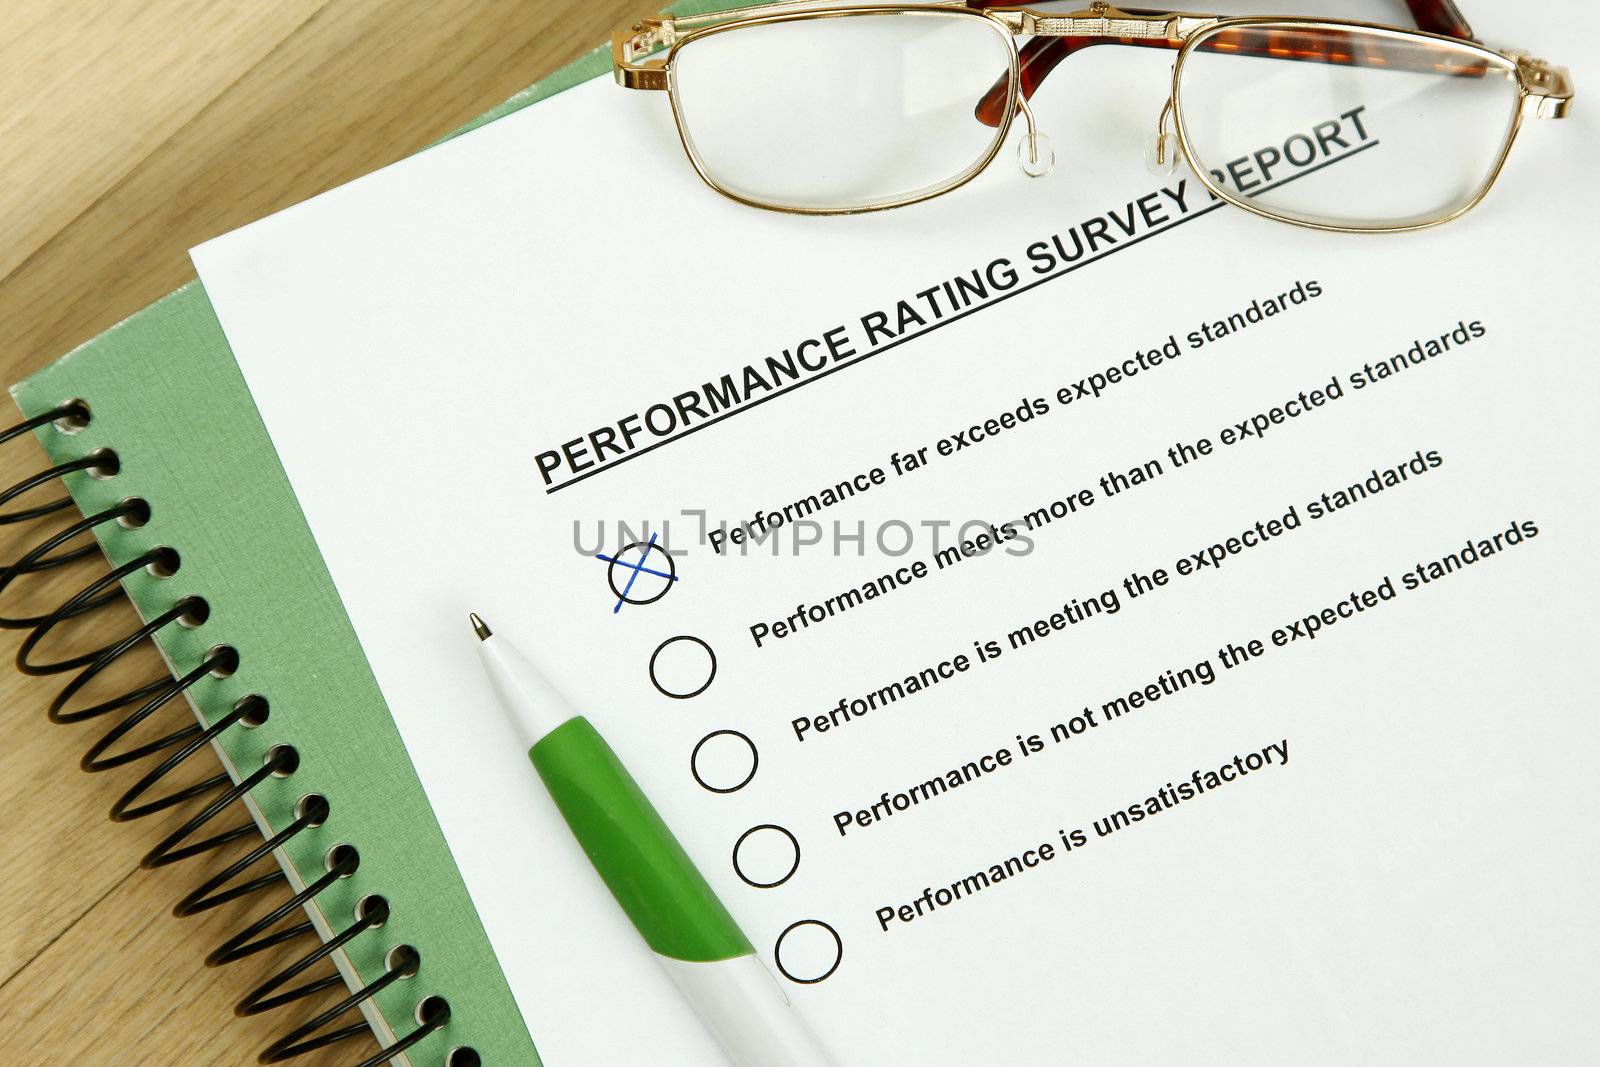 Could be performance appraisal customer service rating business performance evaluation.
